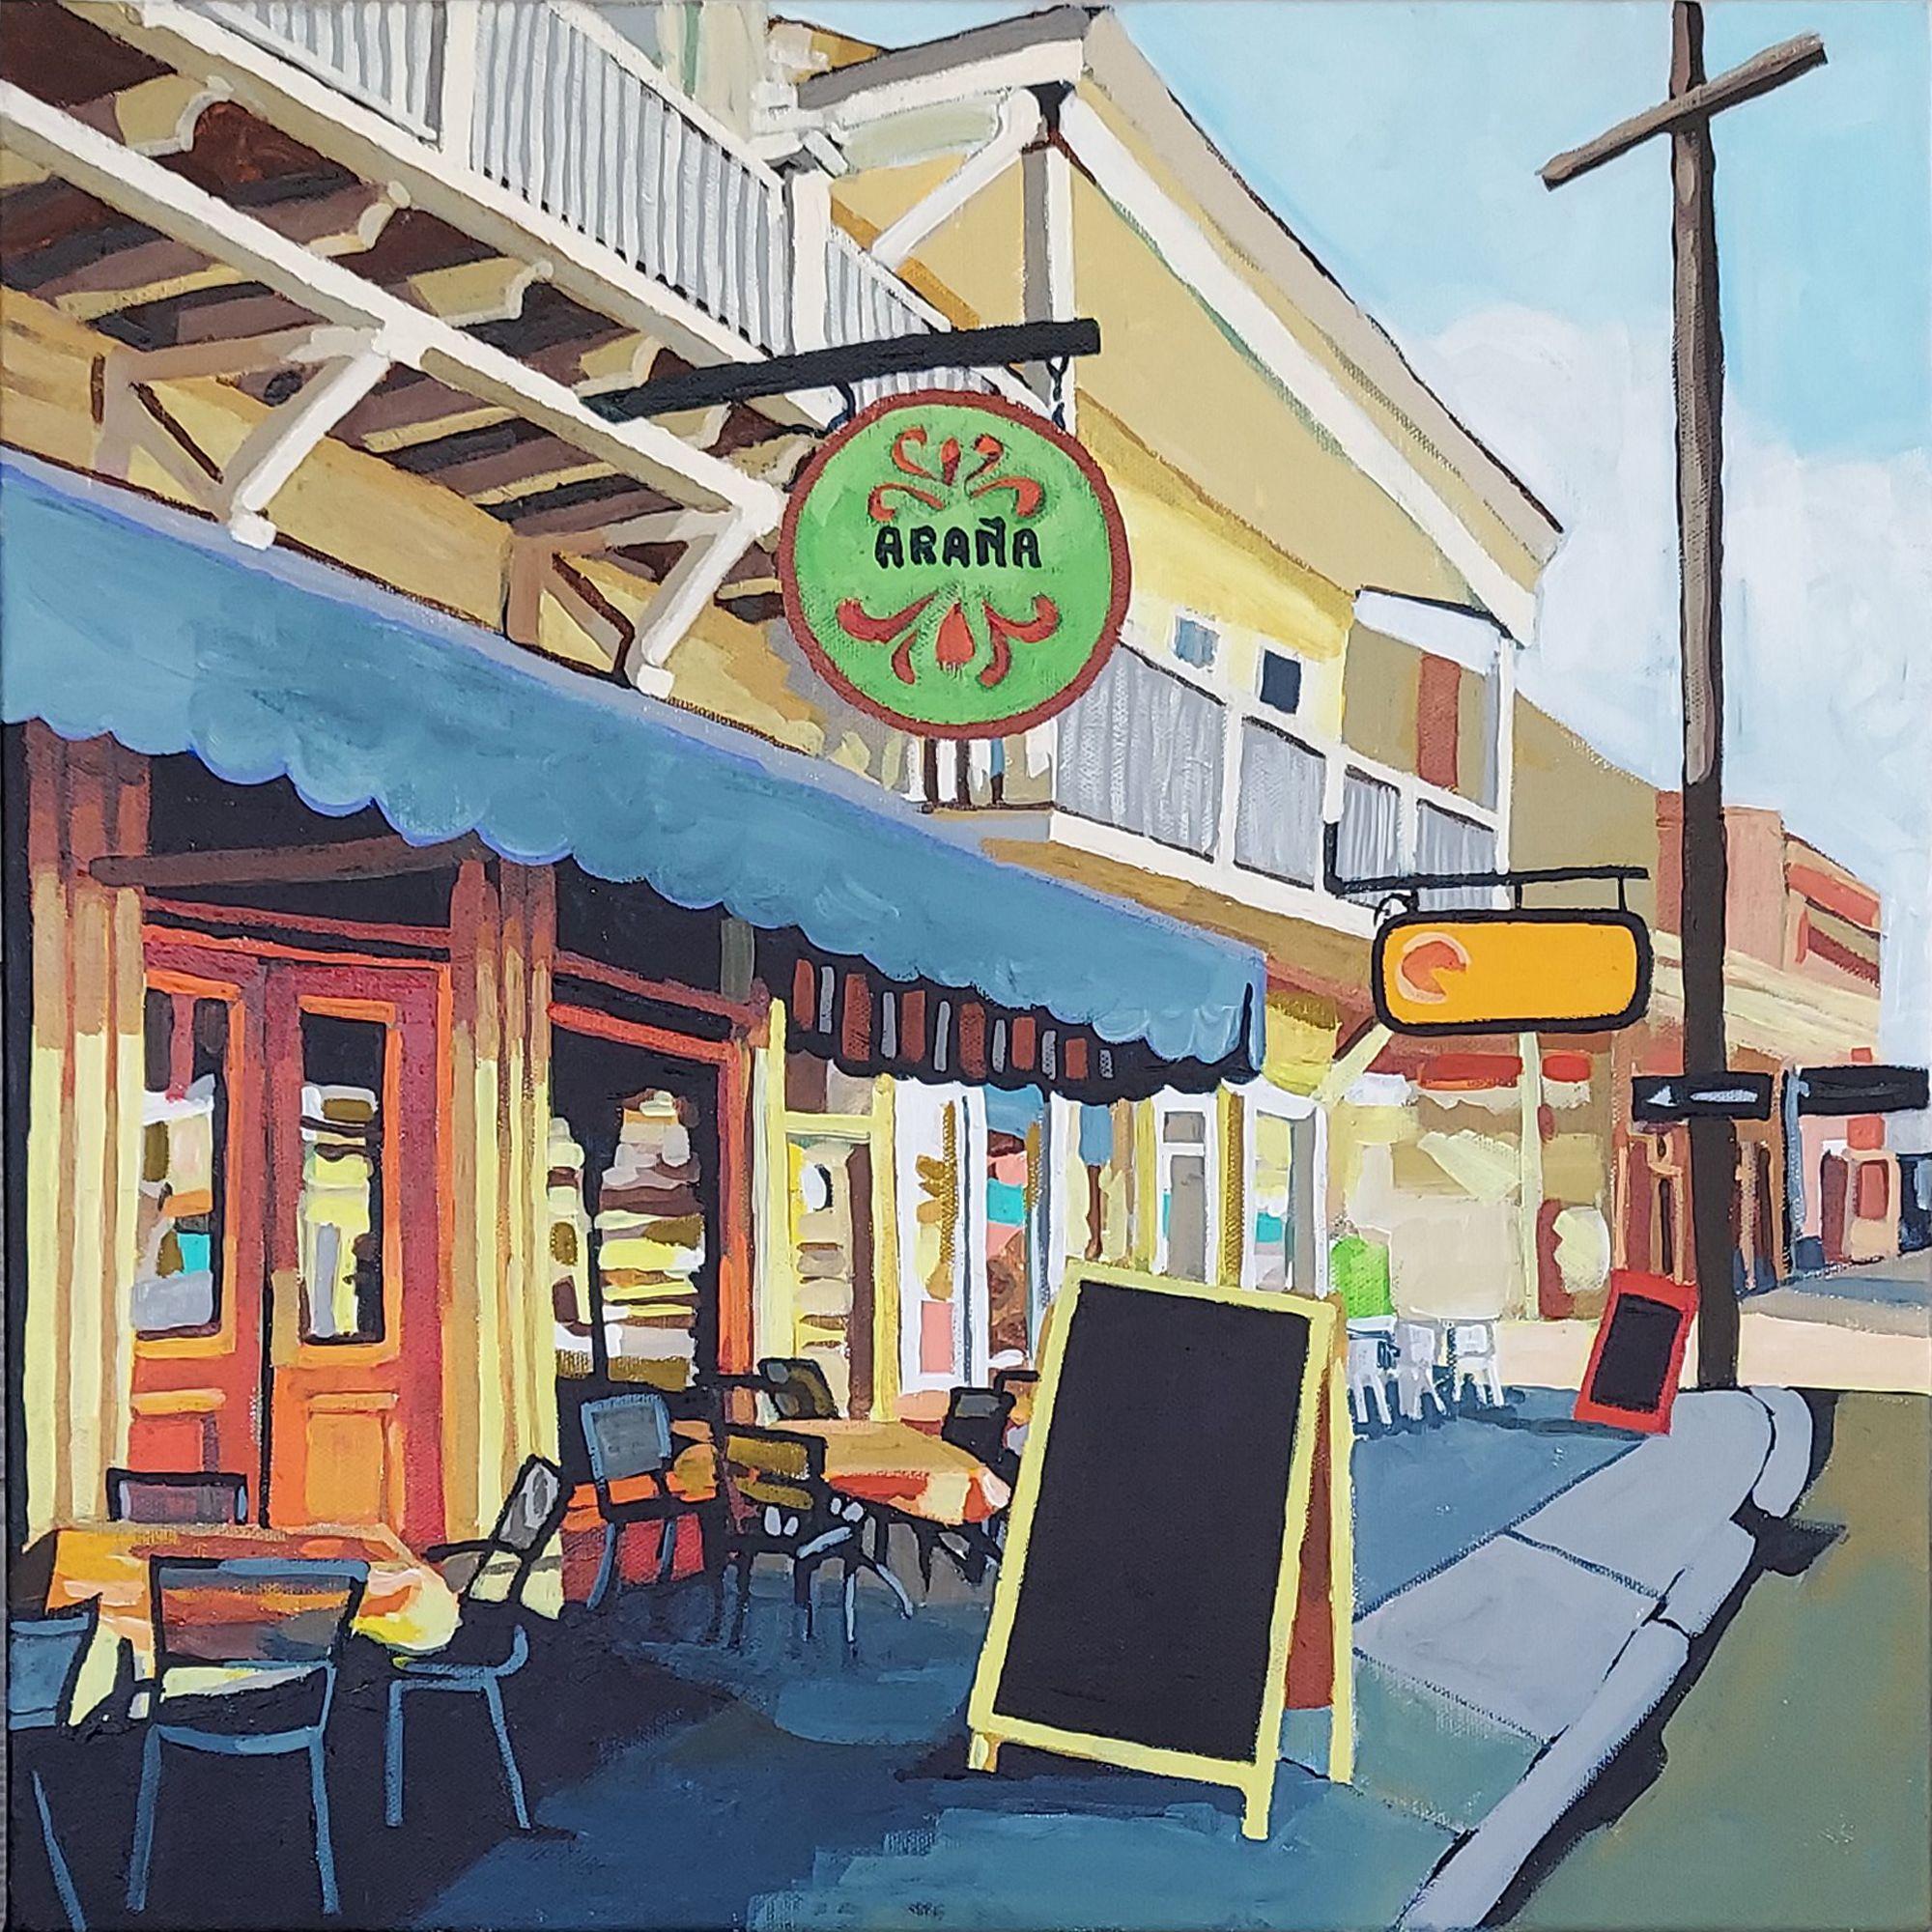 One of those cool restaurants in New Orleans on Magazine Street, which is, or used to be, a great place to shop for antiques. I once bought a rocking chair there. It's definitel one of the most interesting streets in NOLA. :: Painting ::